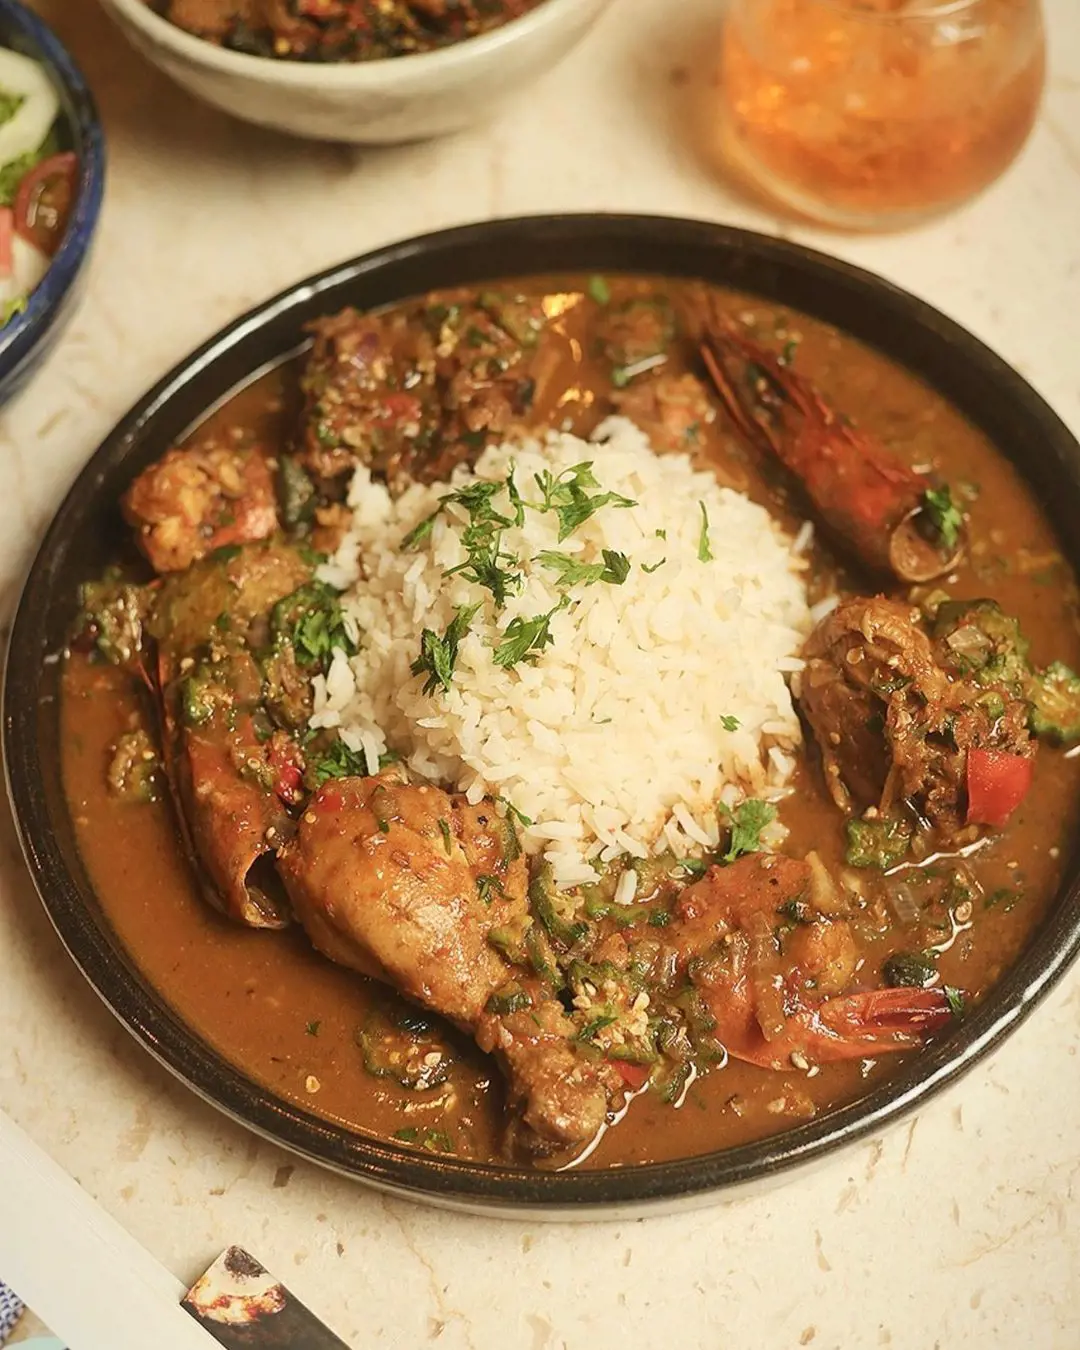 Chicken and okra slow cooked in a gumbo is often paired with rice